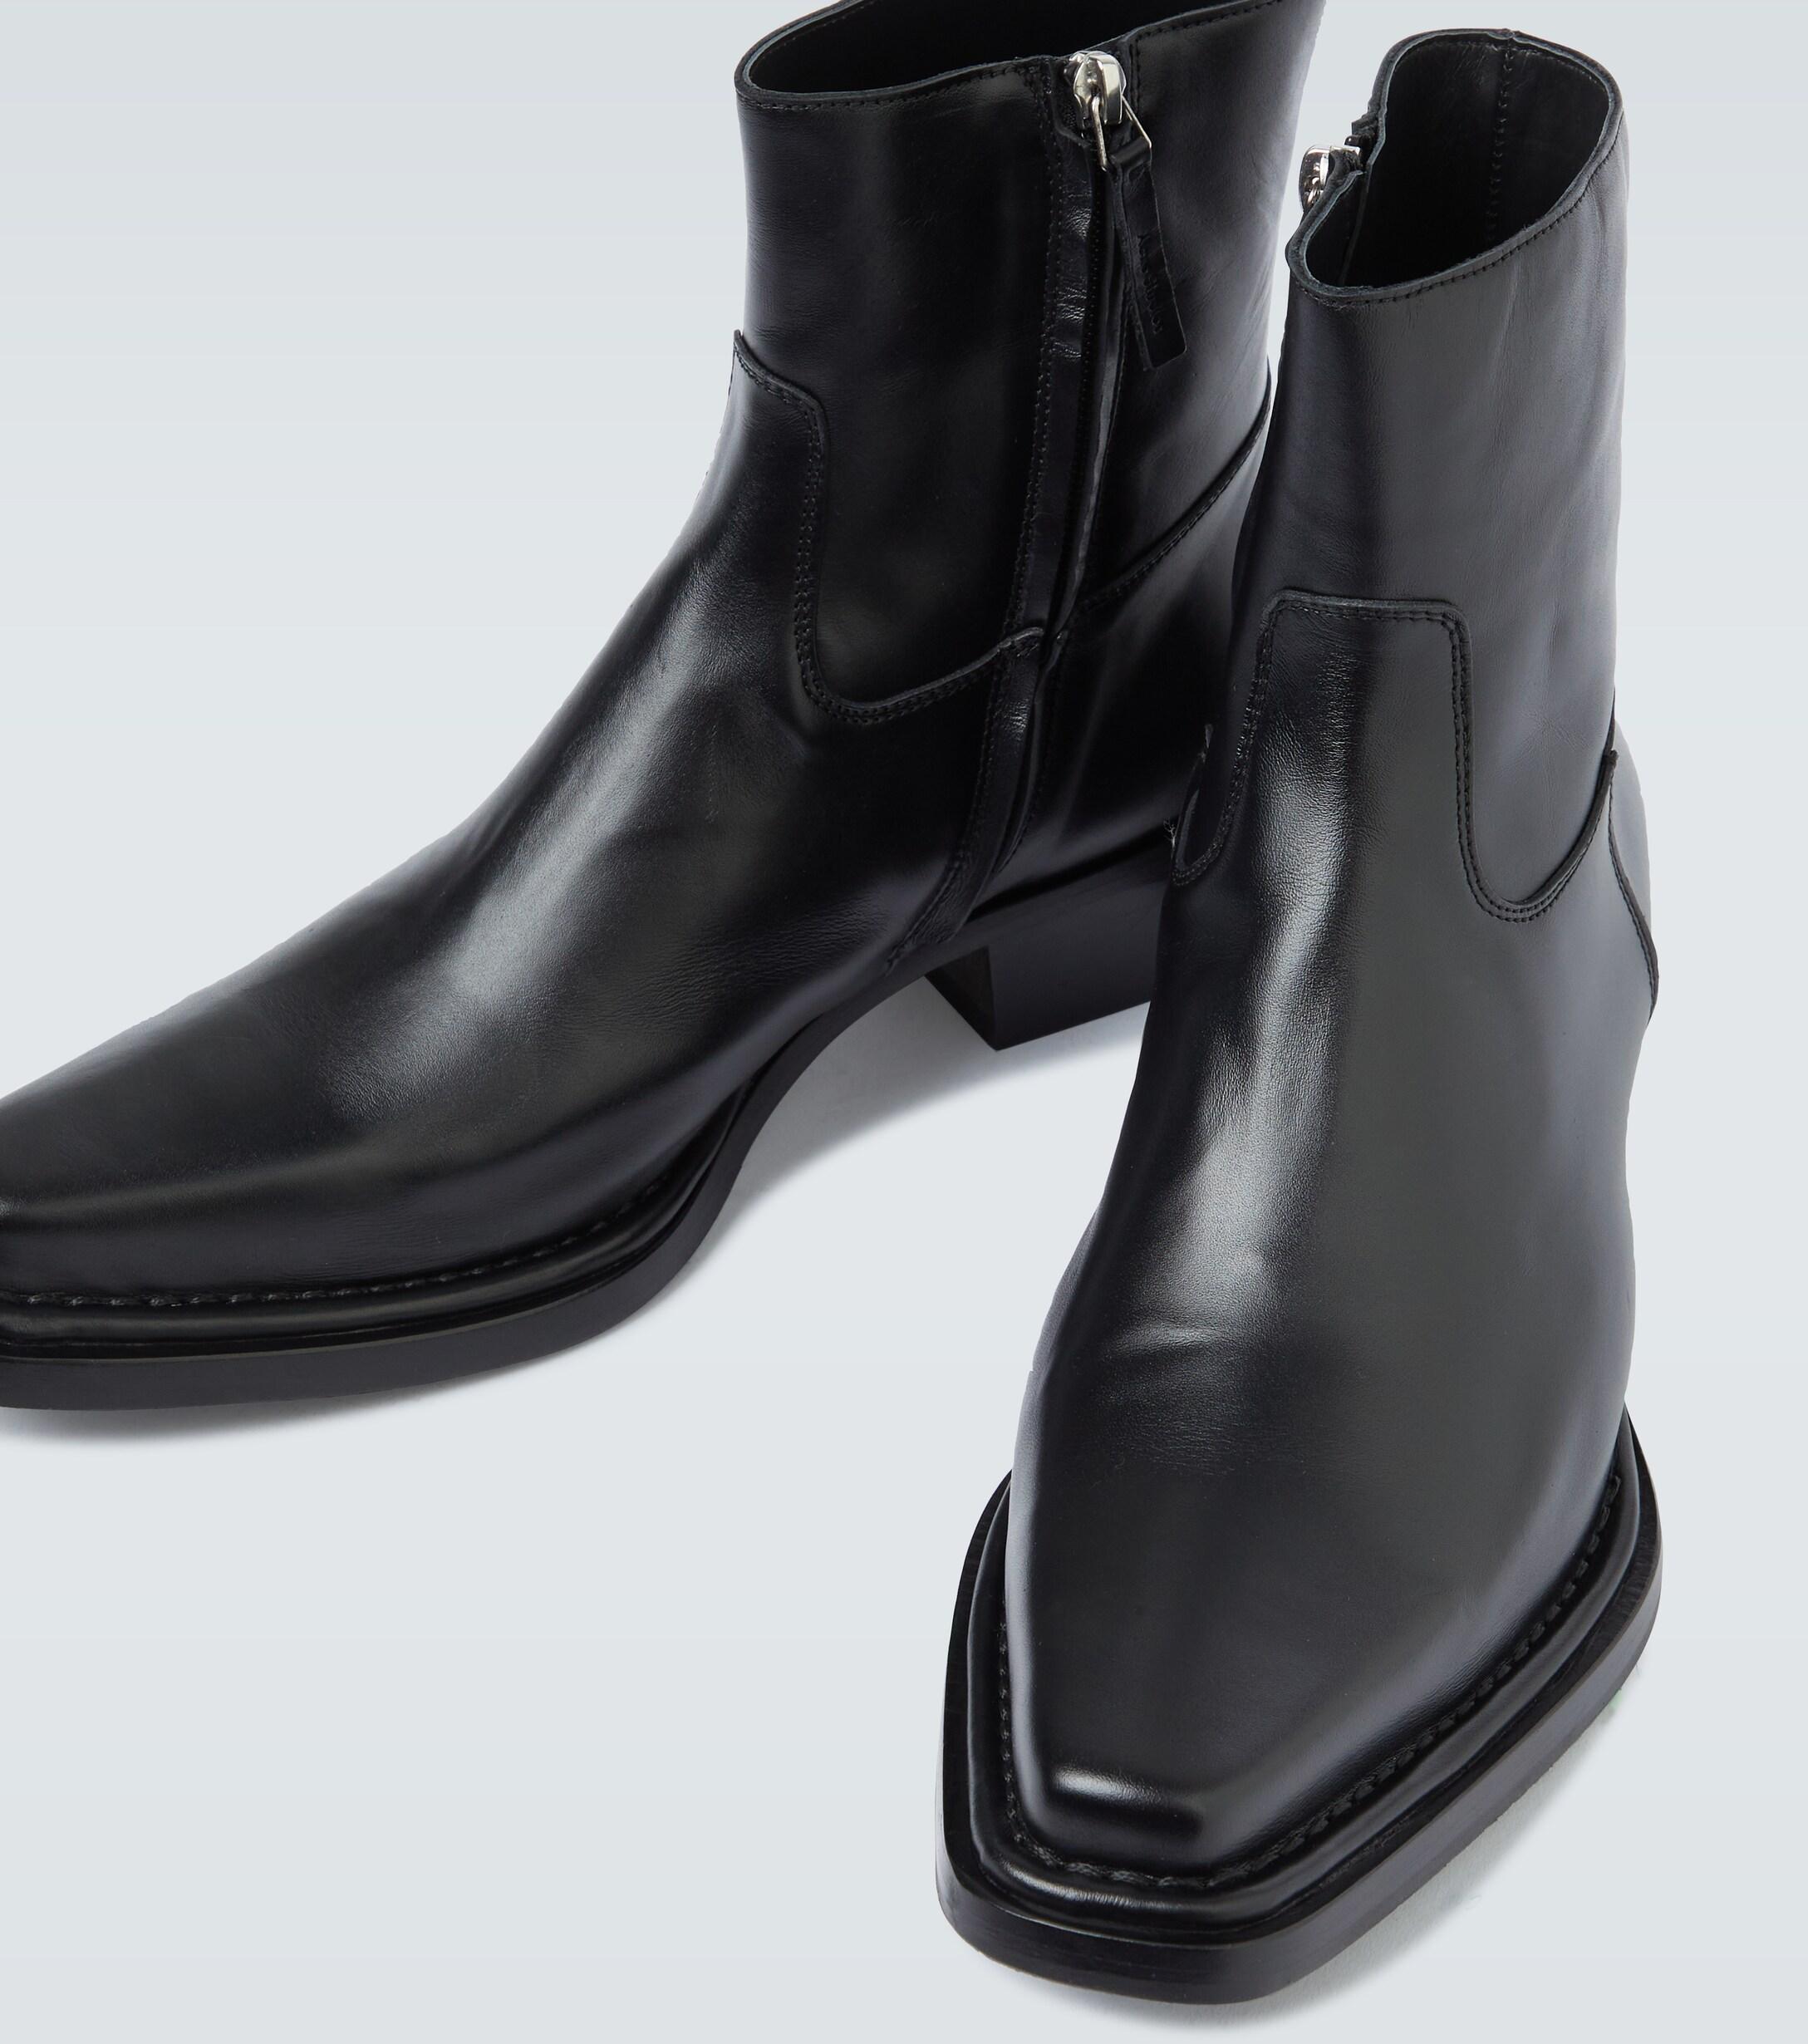 Acne Studios Bruno Leather Cowboy Boots in Black for Men - Lyst